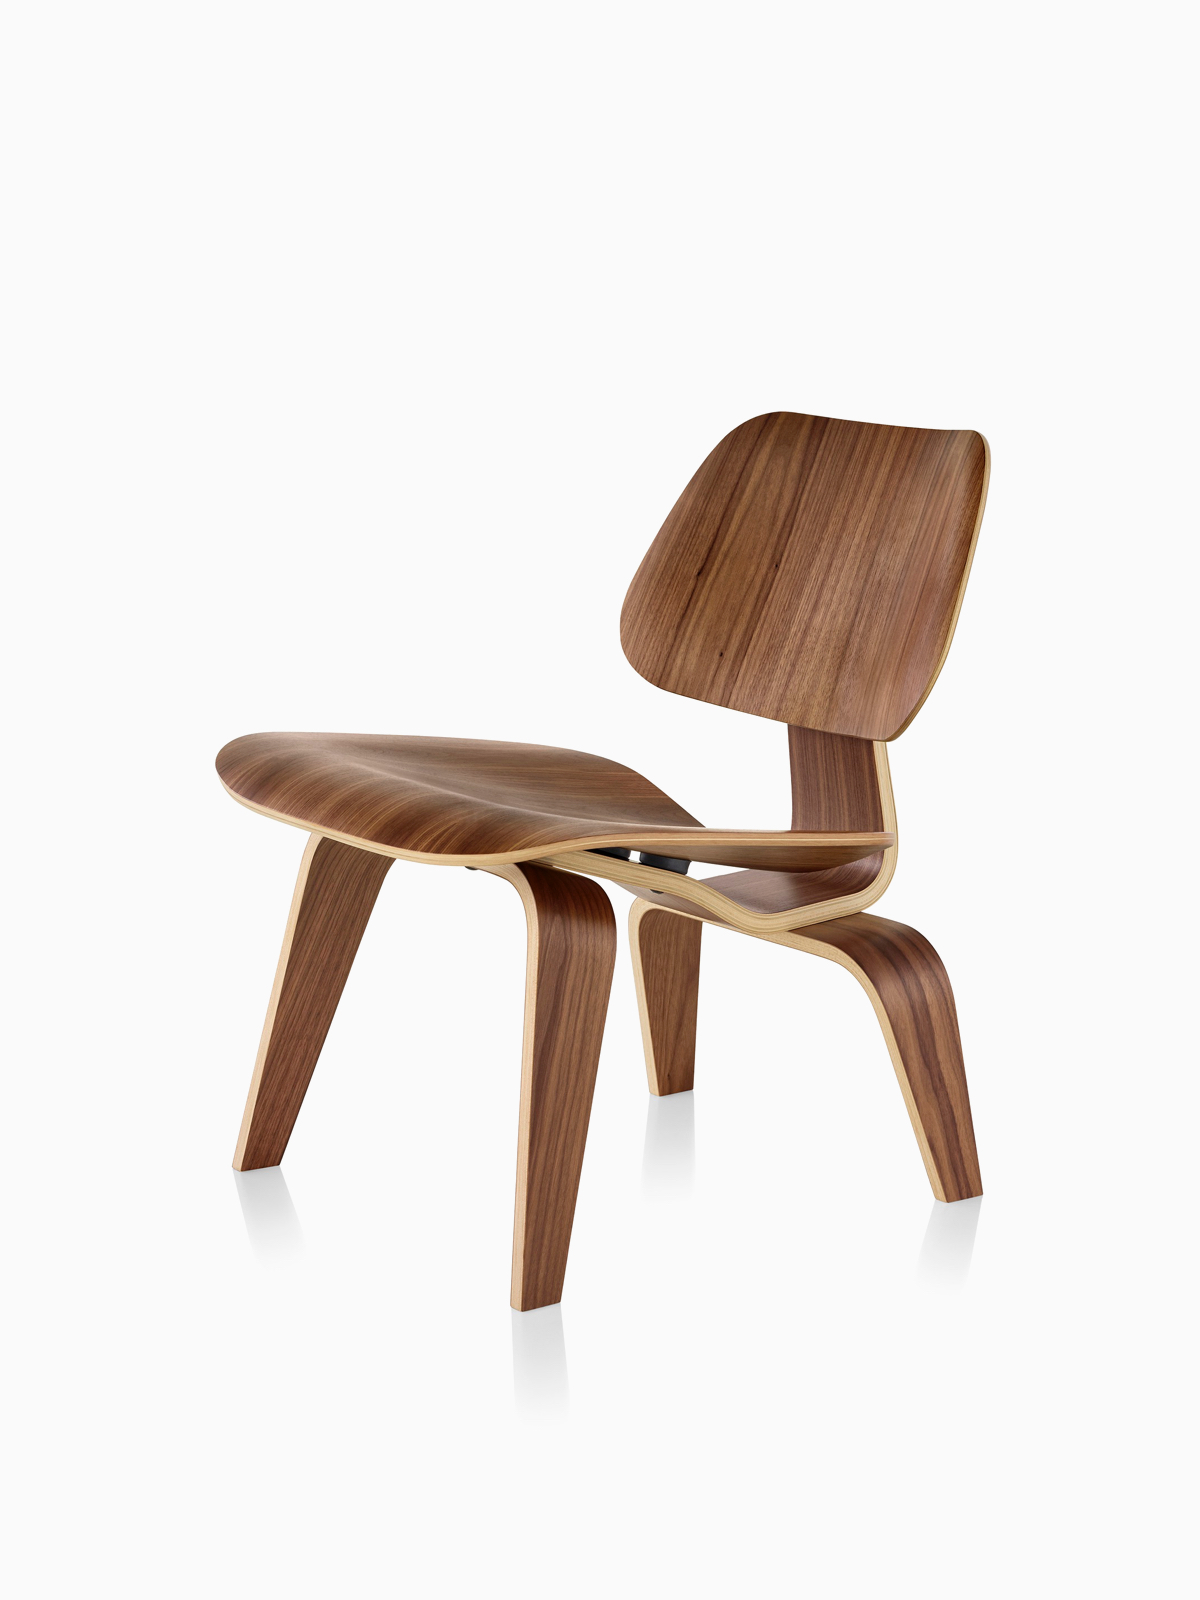 Eames Moulded Plywood Chairs